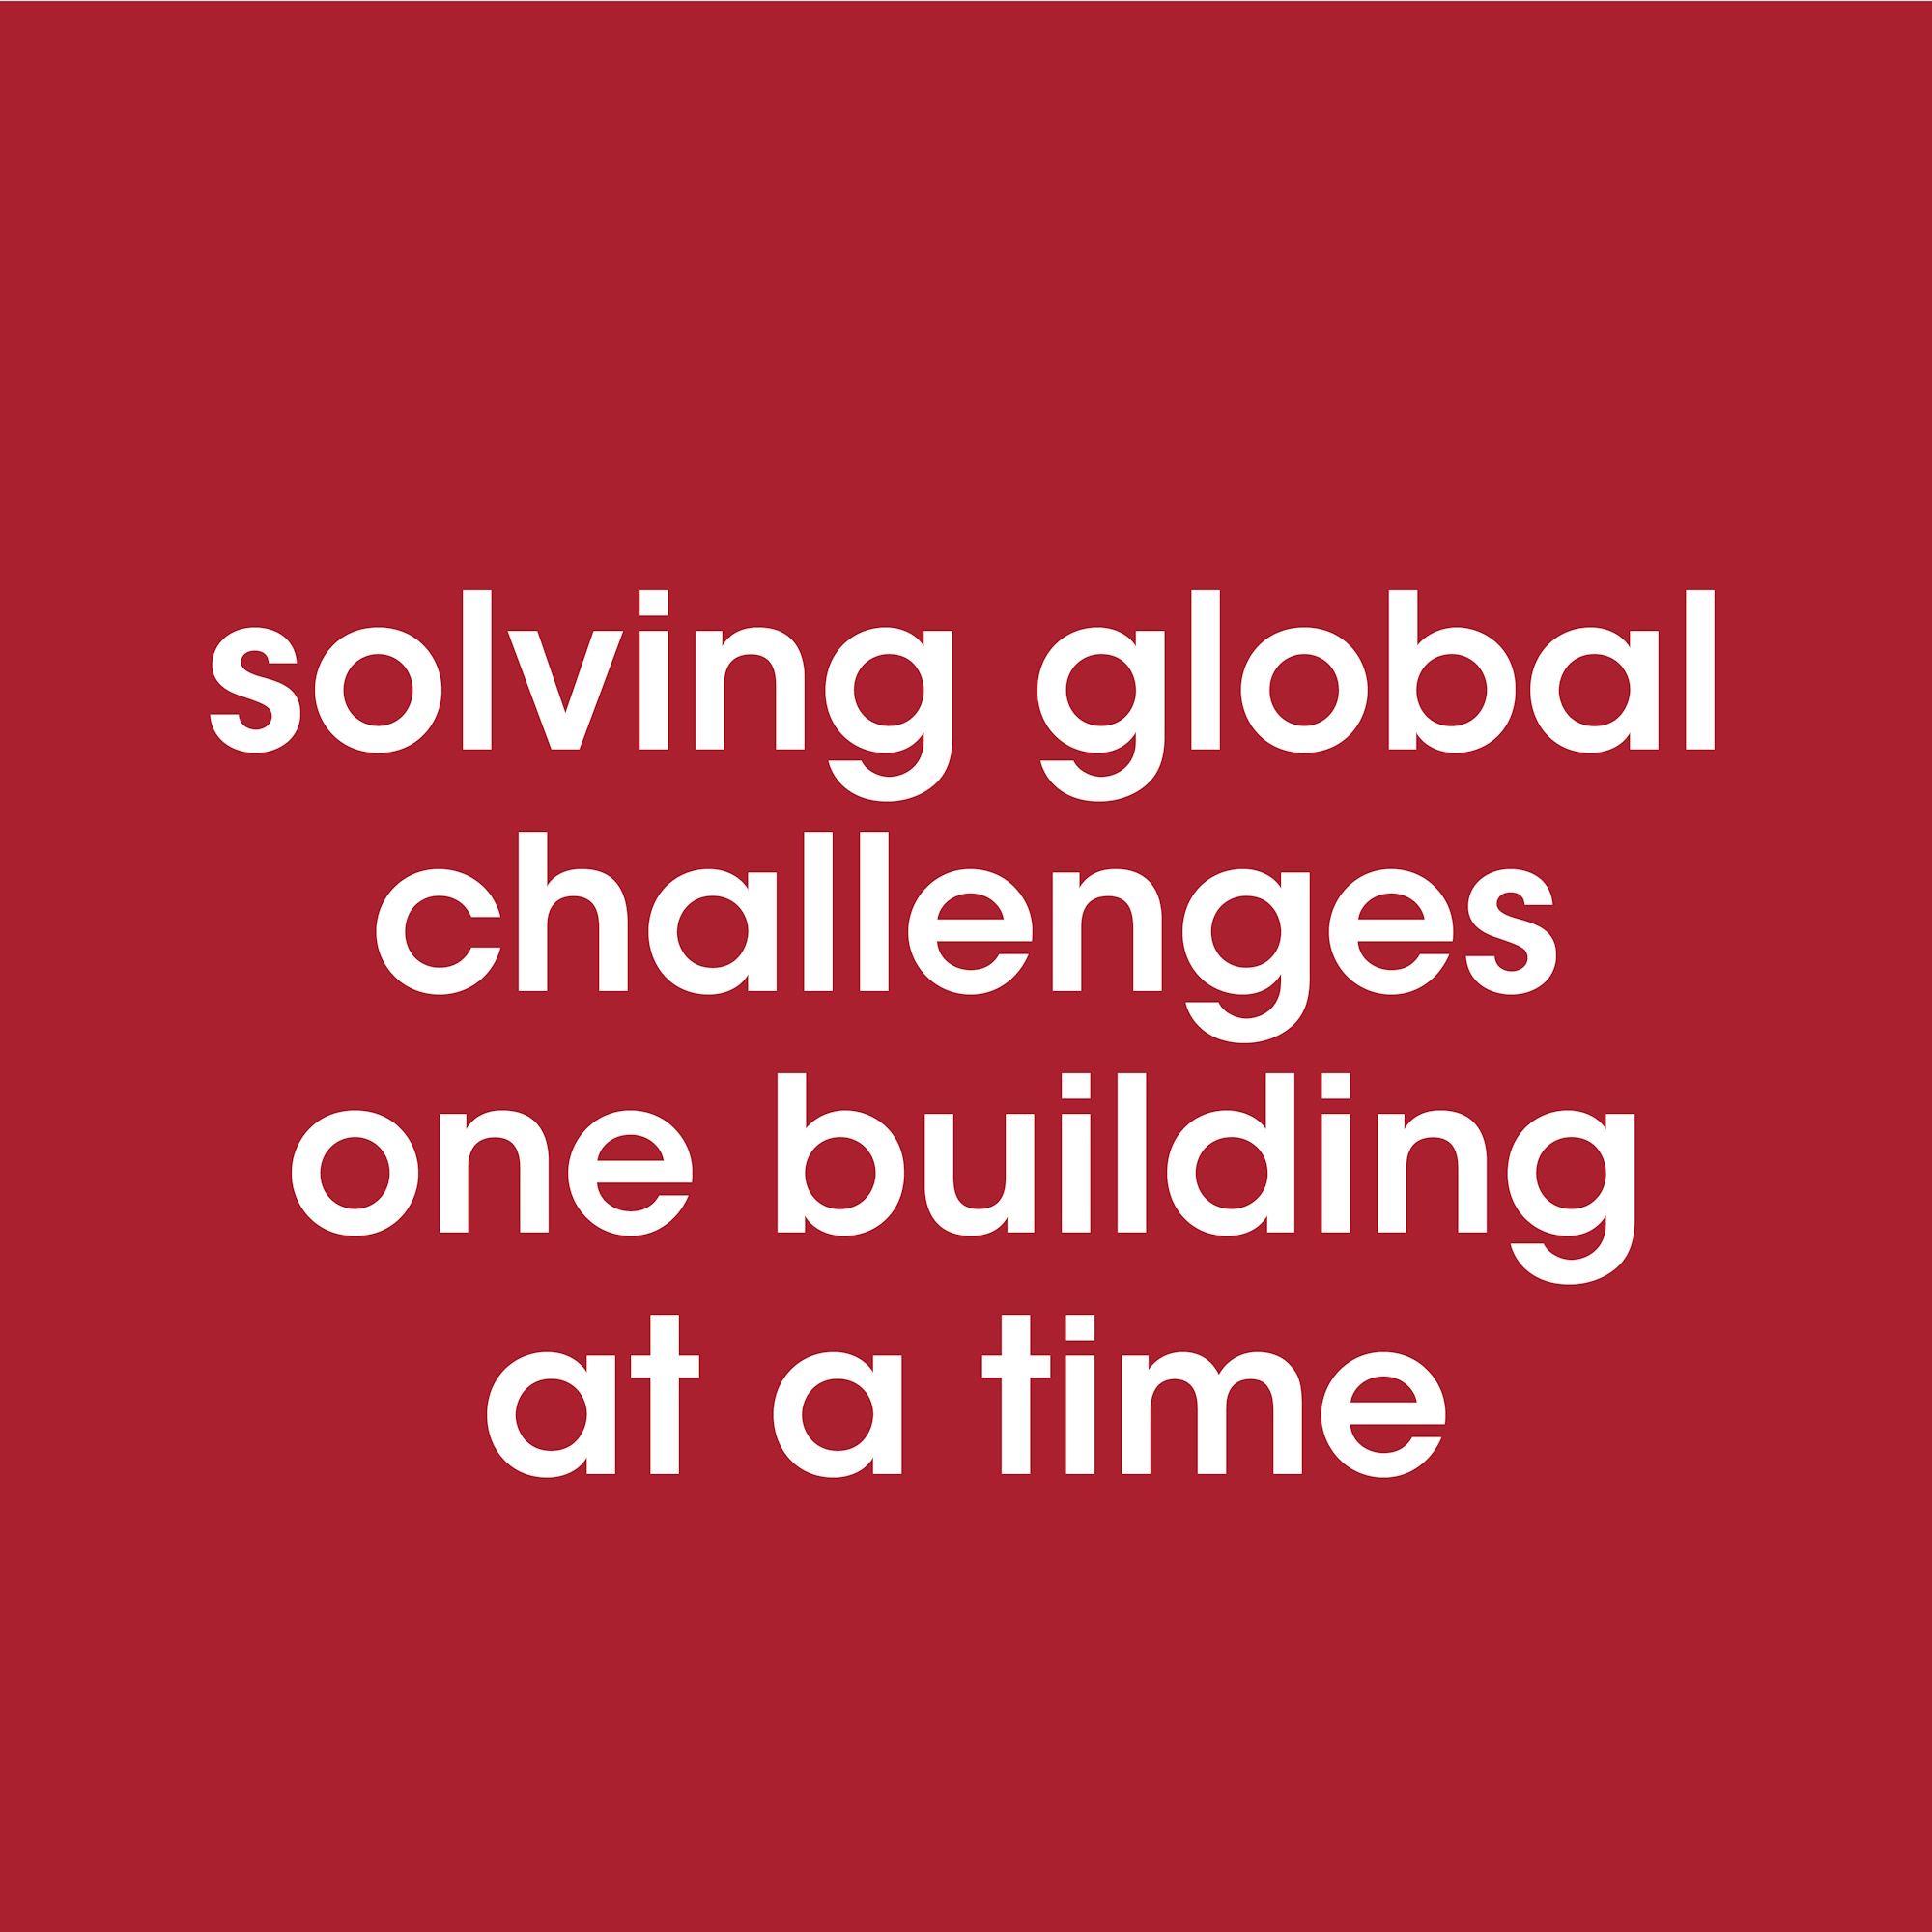 Ingleton Wood solving global challenges one building at a time